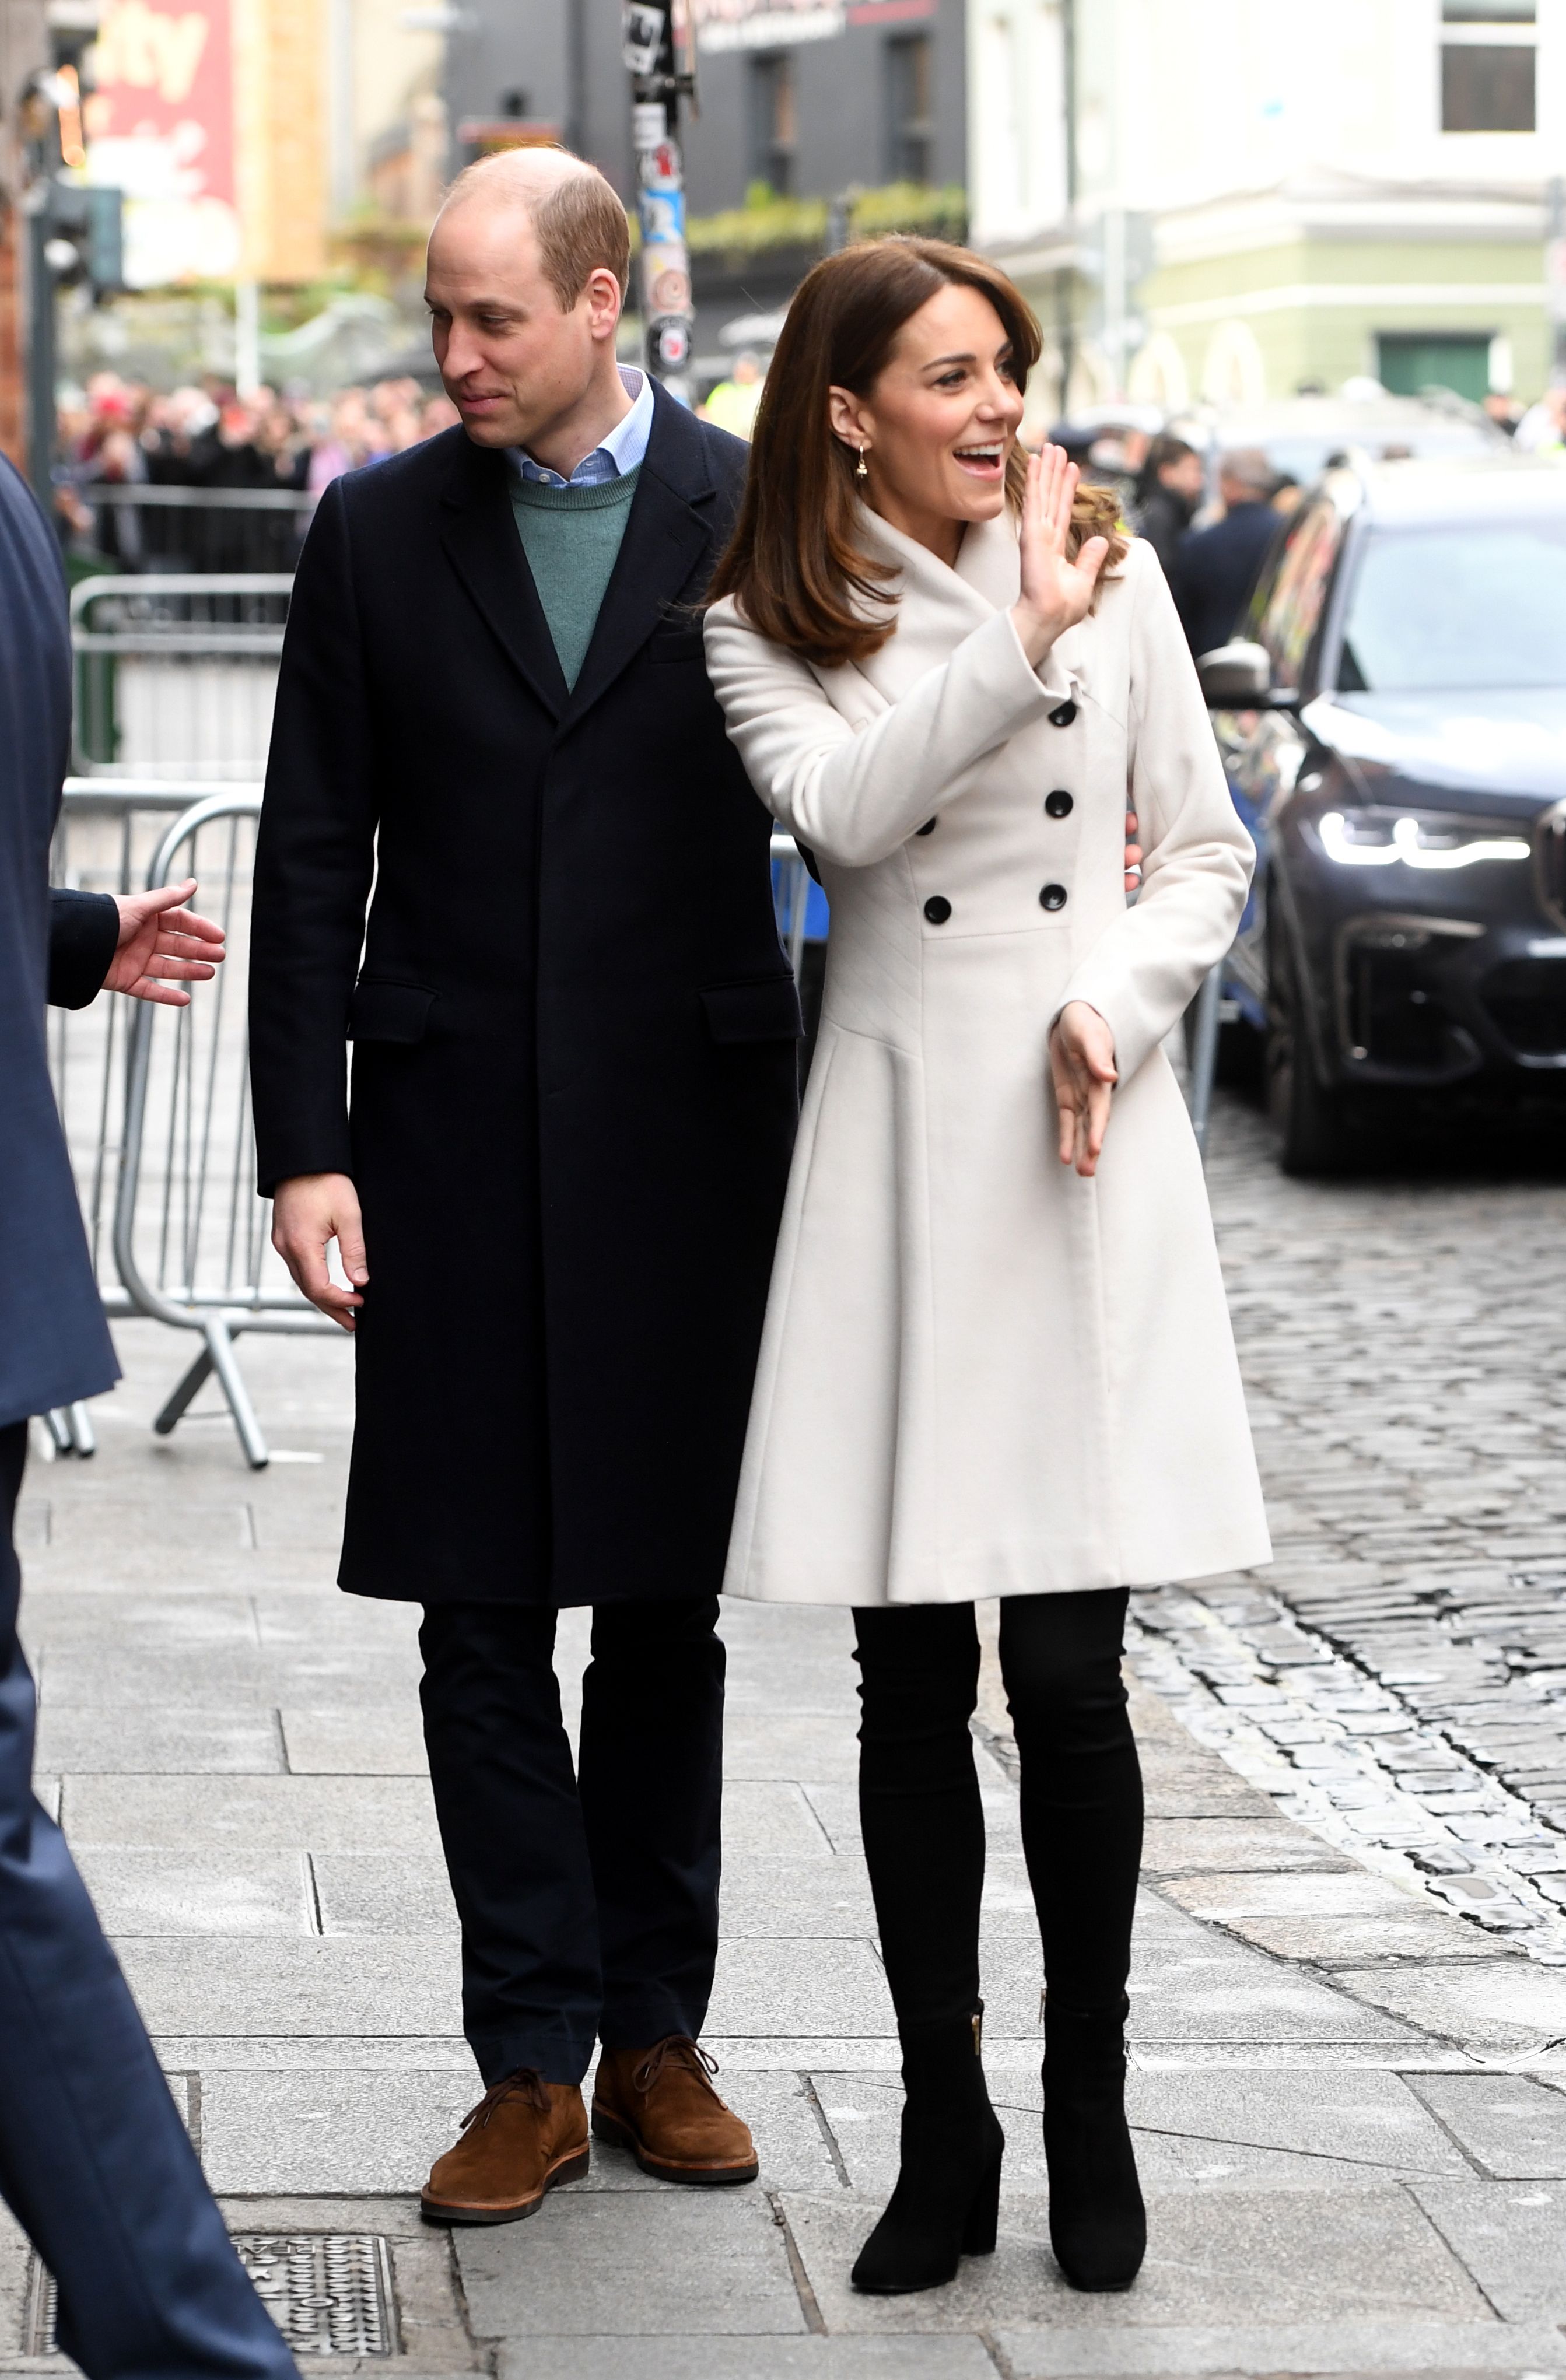 Prince William and Duchess Kate visit Jigsaw, the National Centre for Youth Mental Health on March 04, 2020, in Dublin, Ireland | Photo: Facundo Arrizabalaga/Pool/Samir Hussein/WireImage/Getty Images